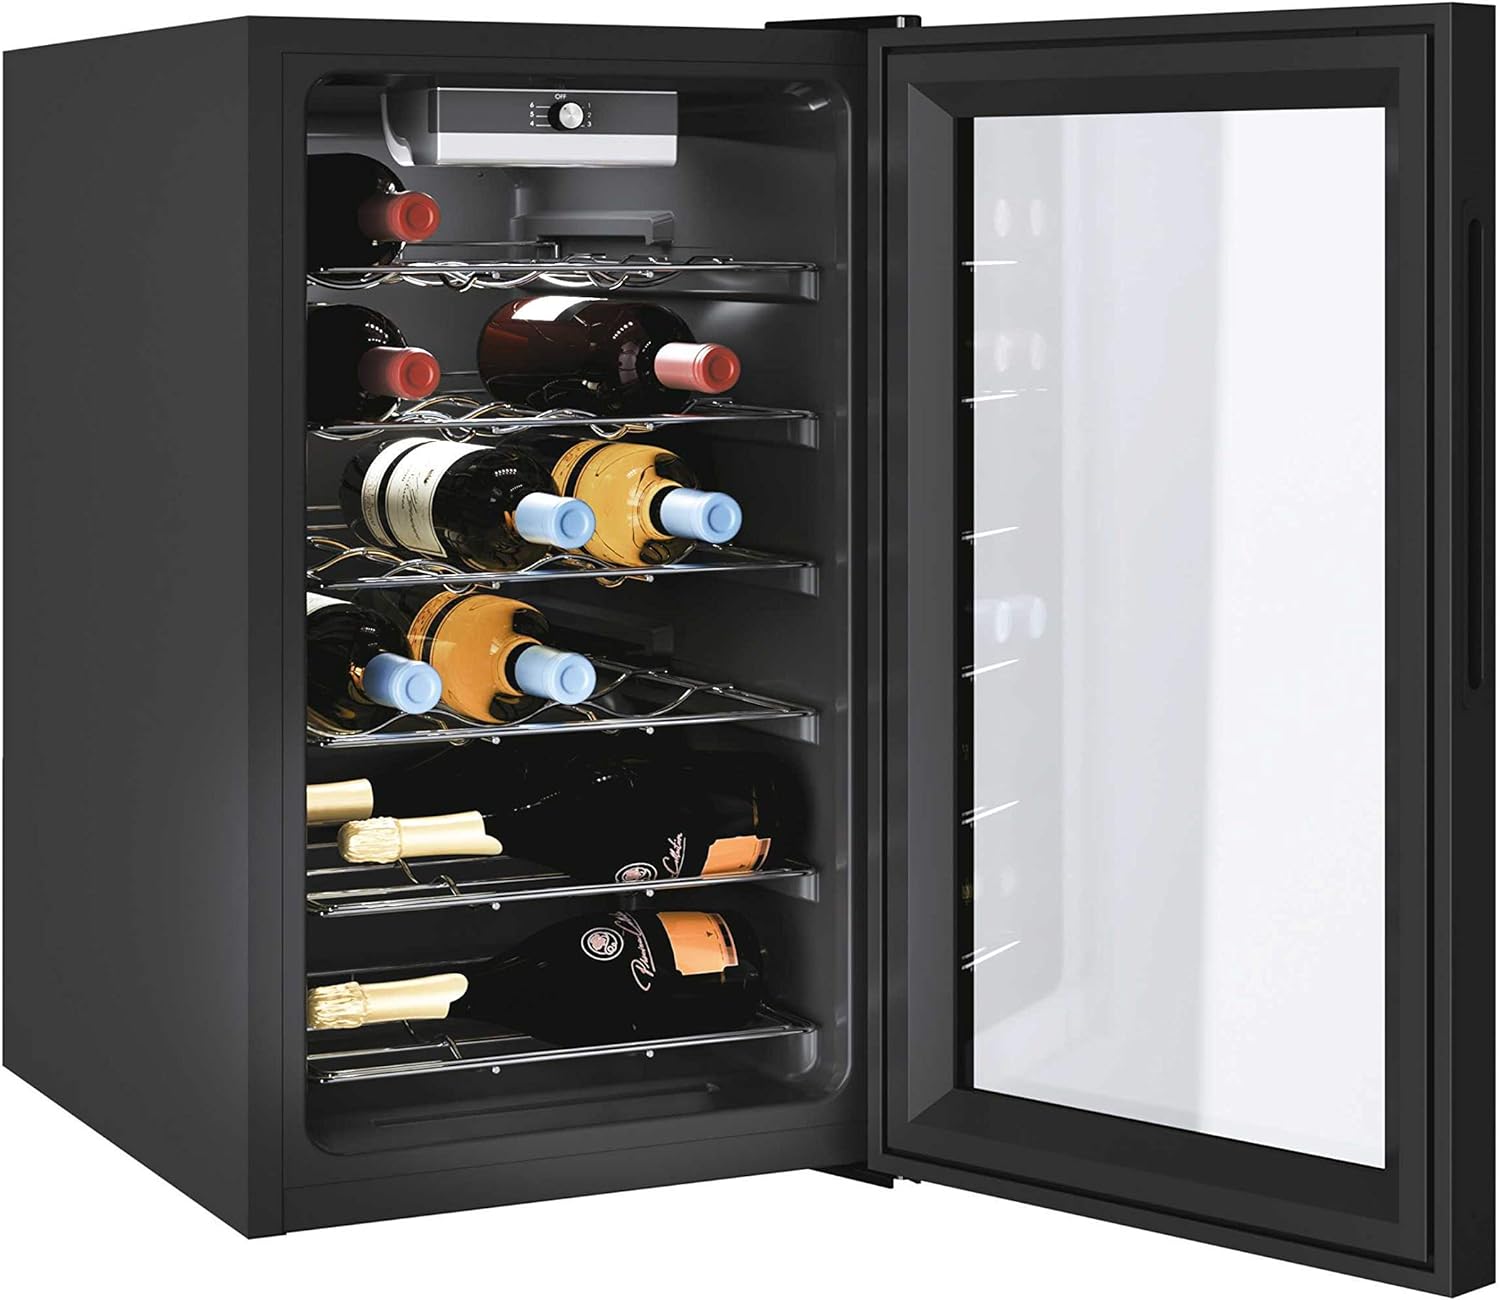 Candy CWC021MKN 21 Bottle Wine Cooler - Black-1591